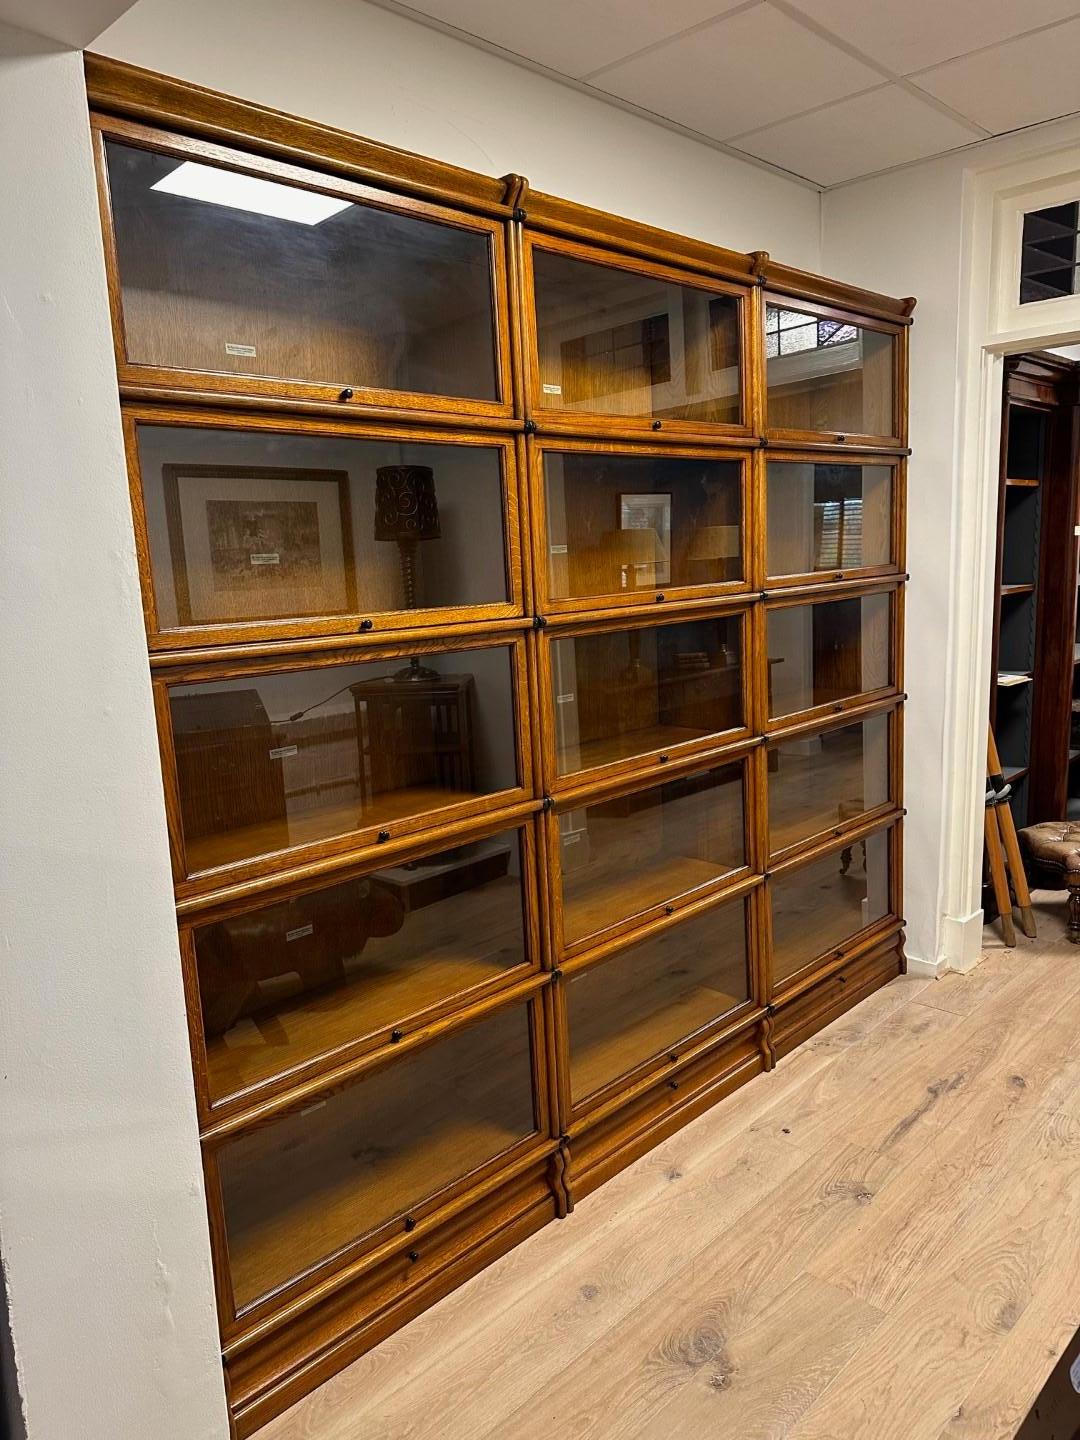 Solid oak Globe Wernicke bookcase. Back and bottom are always plywood in Globe Wernicke Bookcases. Completely made up of 15 stackable parts. Plinths are equipped with drawers. Completely in perfect condition. Top quality.
Size: 258cm x 35cm x